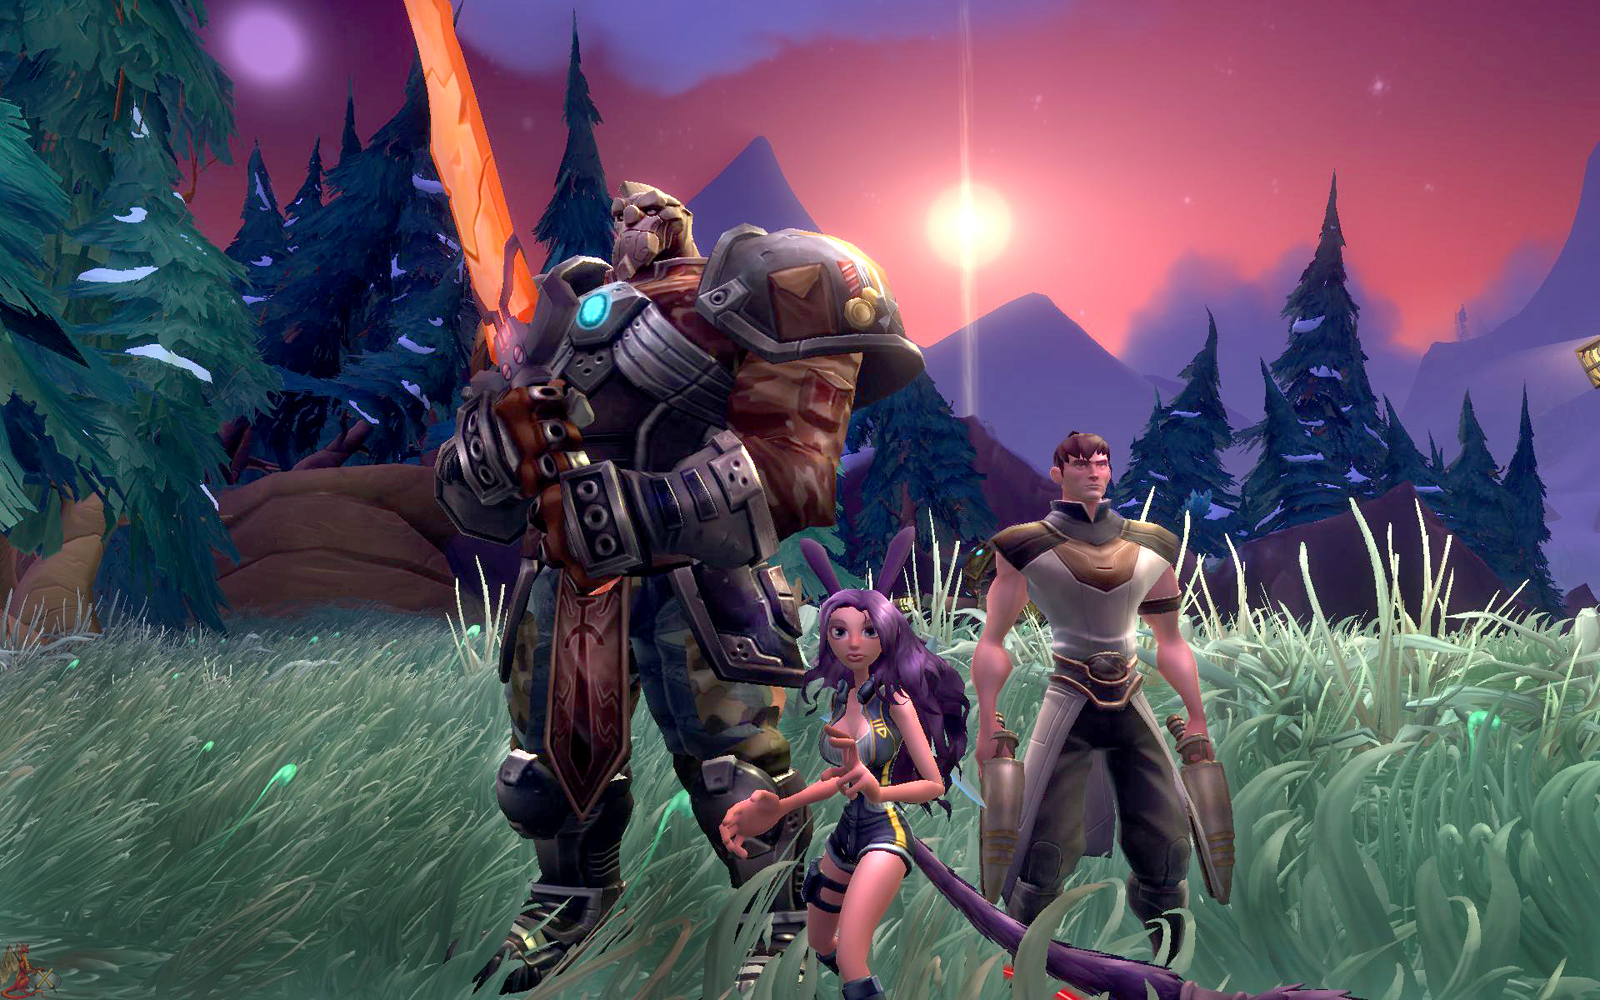 Geek insider, geekinsider, geekinsider. Com,, wildstar: a wildly fun mmo, gaming